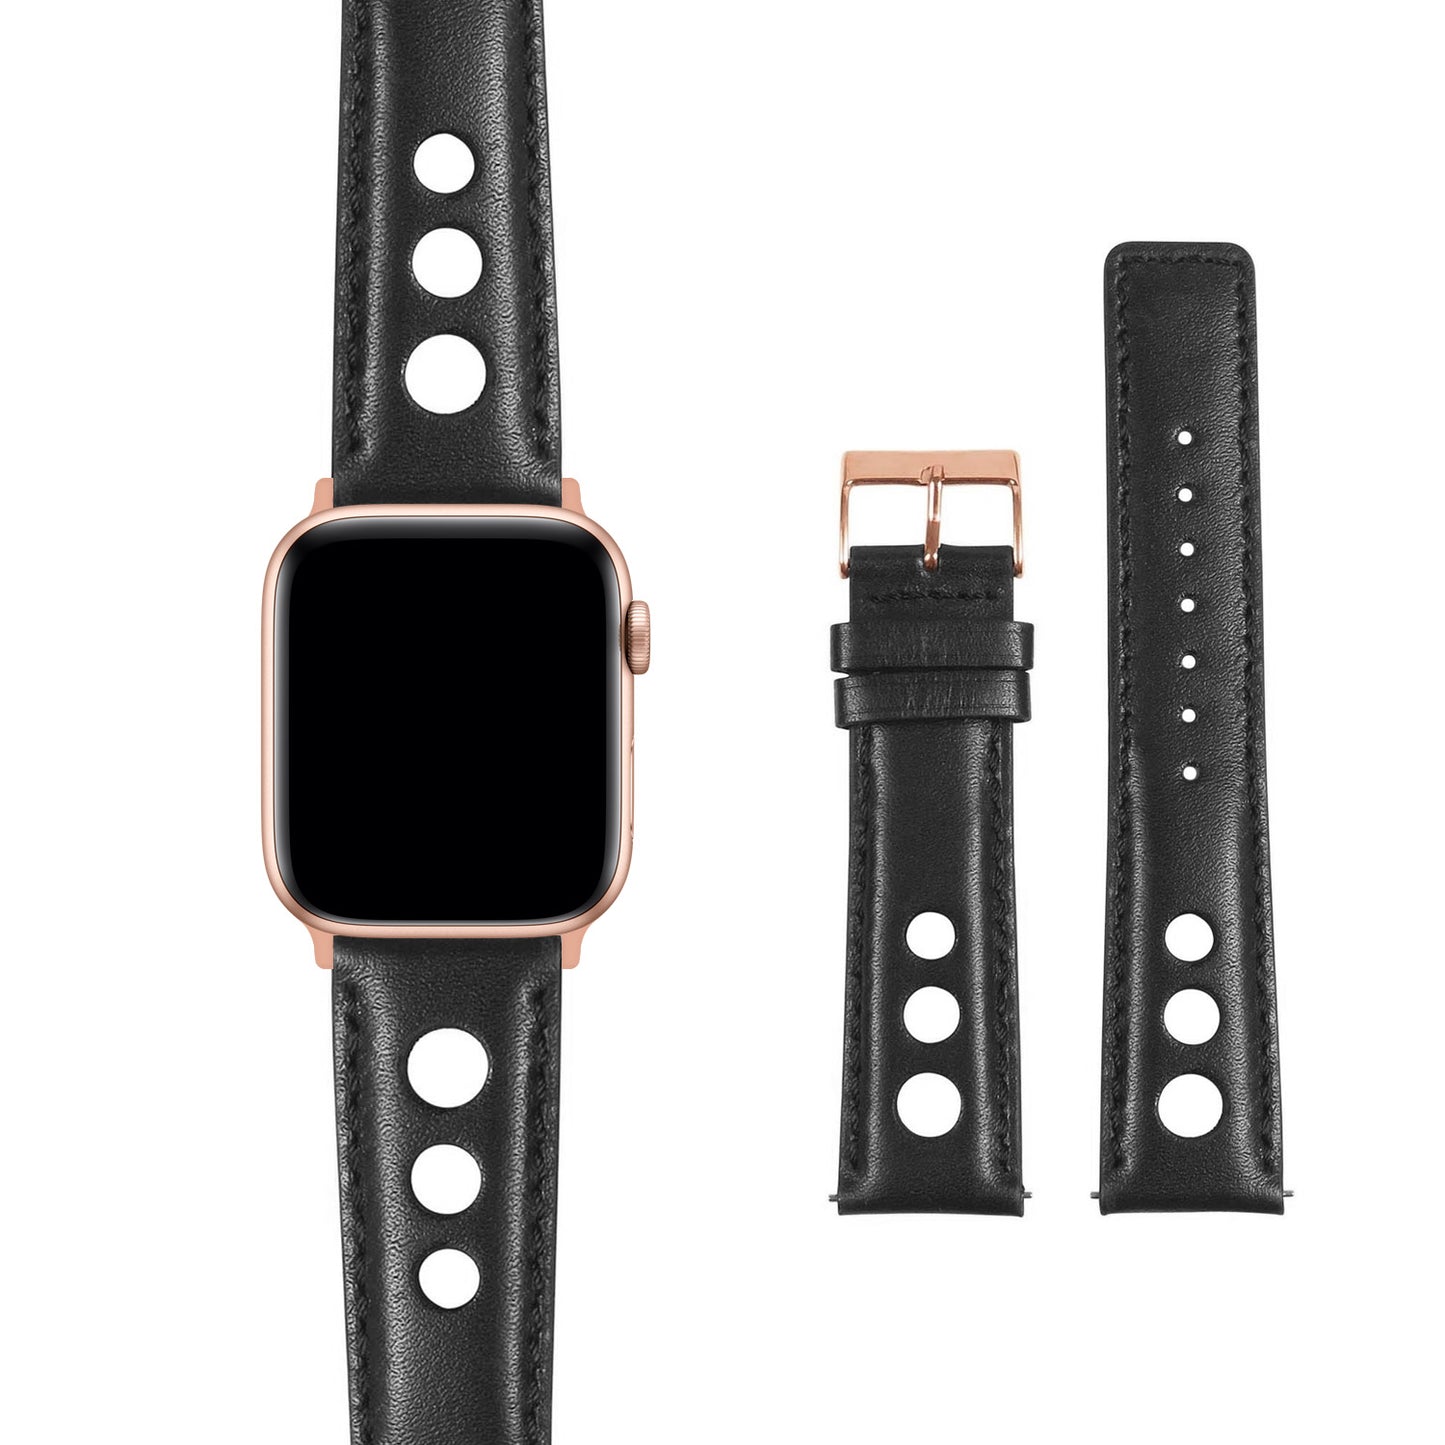 Leather Rally Strap w/ Black Buckle for Apple Watch